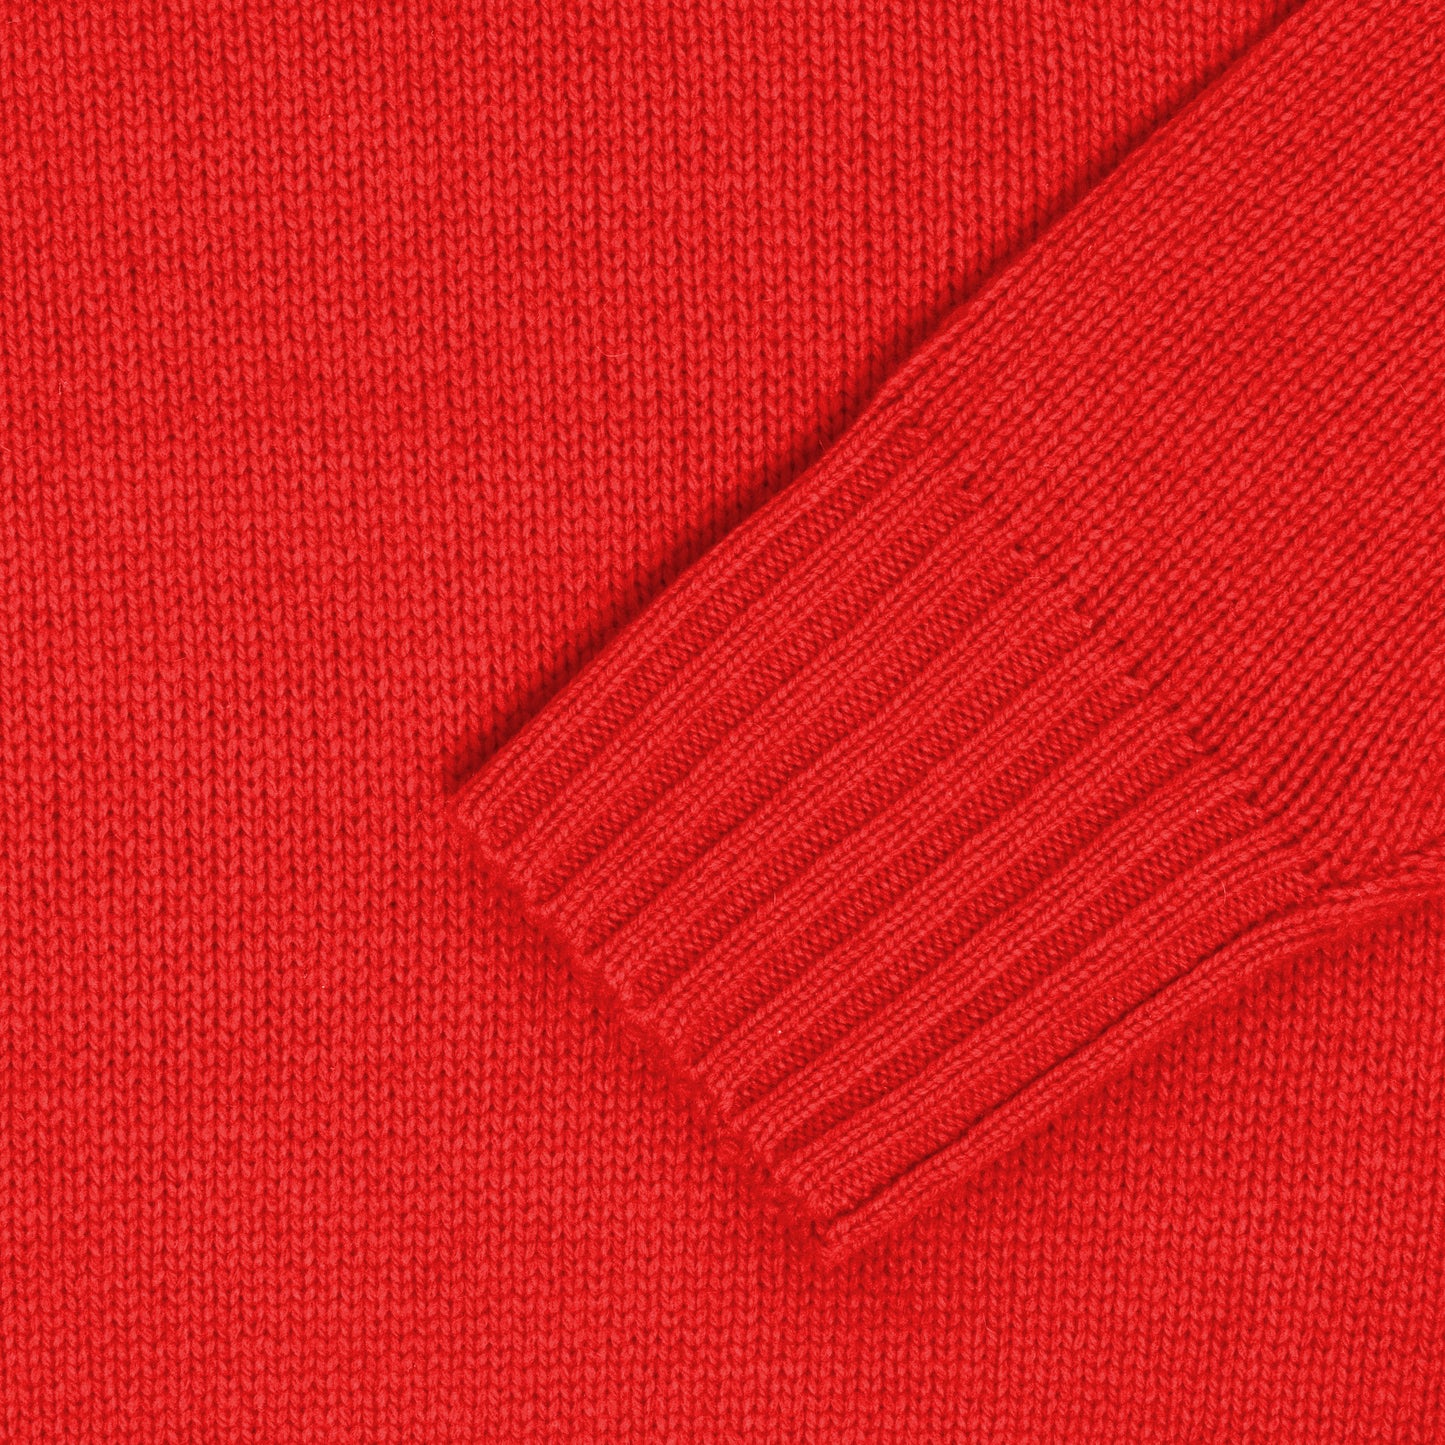 'Tyson Beckford Sweater' RED